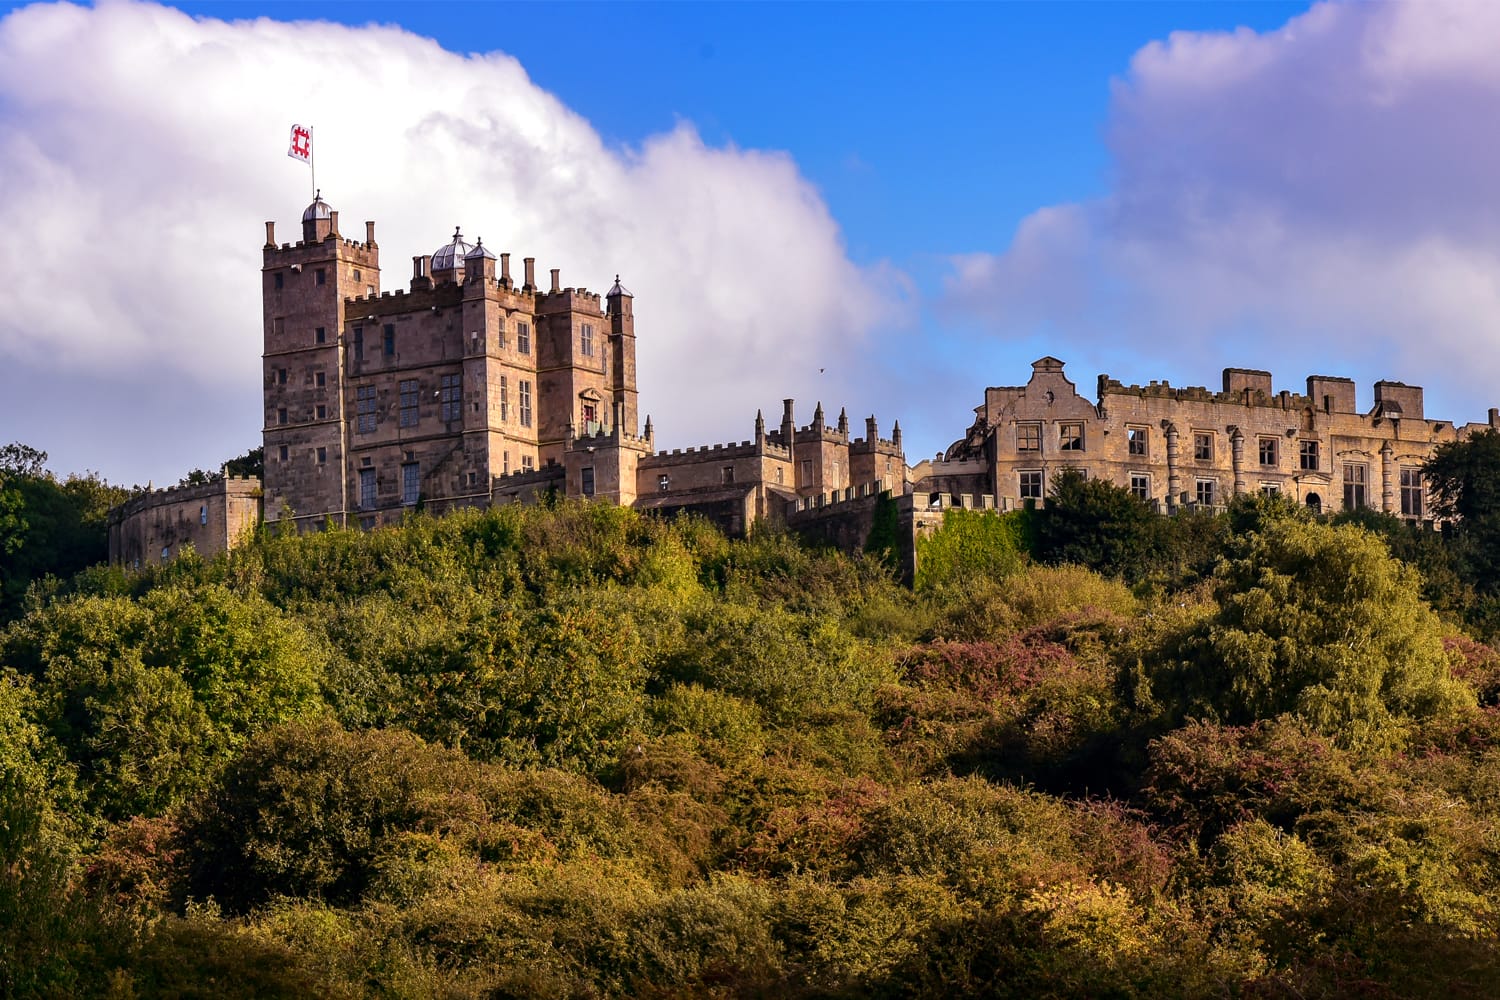 Panorama of Bolsover Castle in Derbyshire England